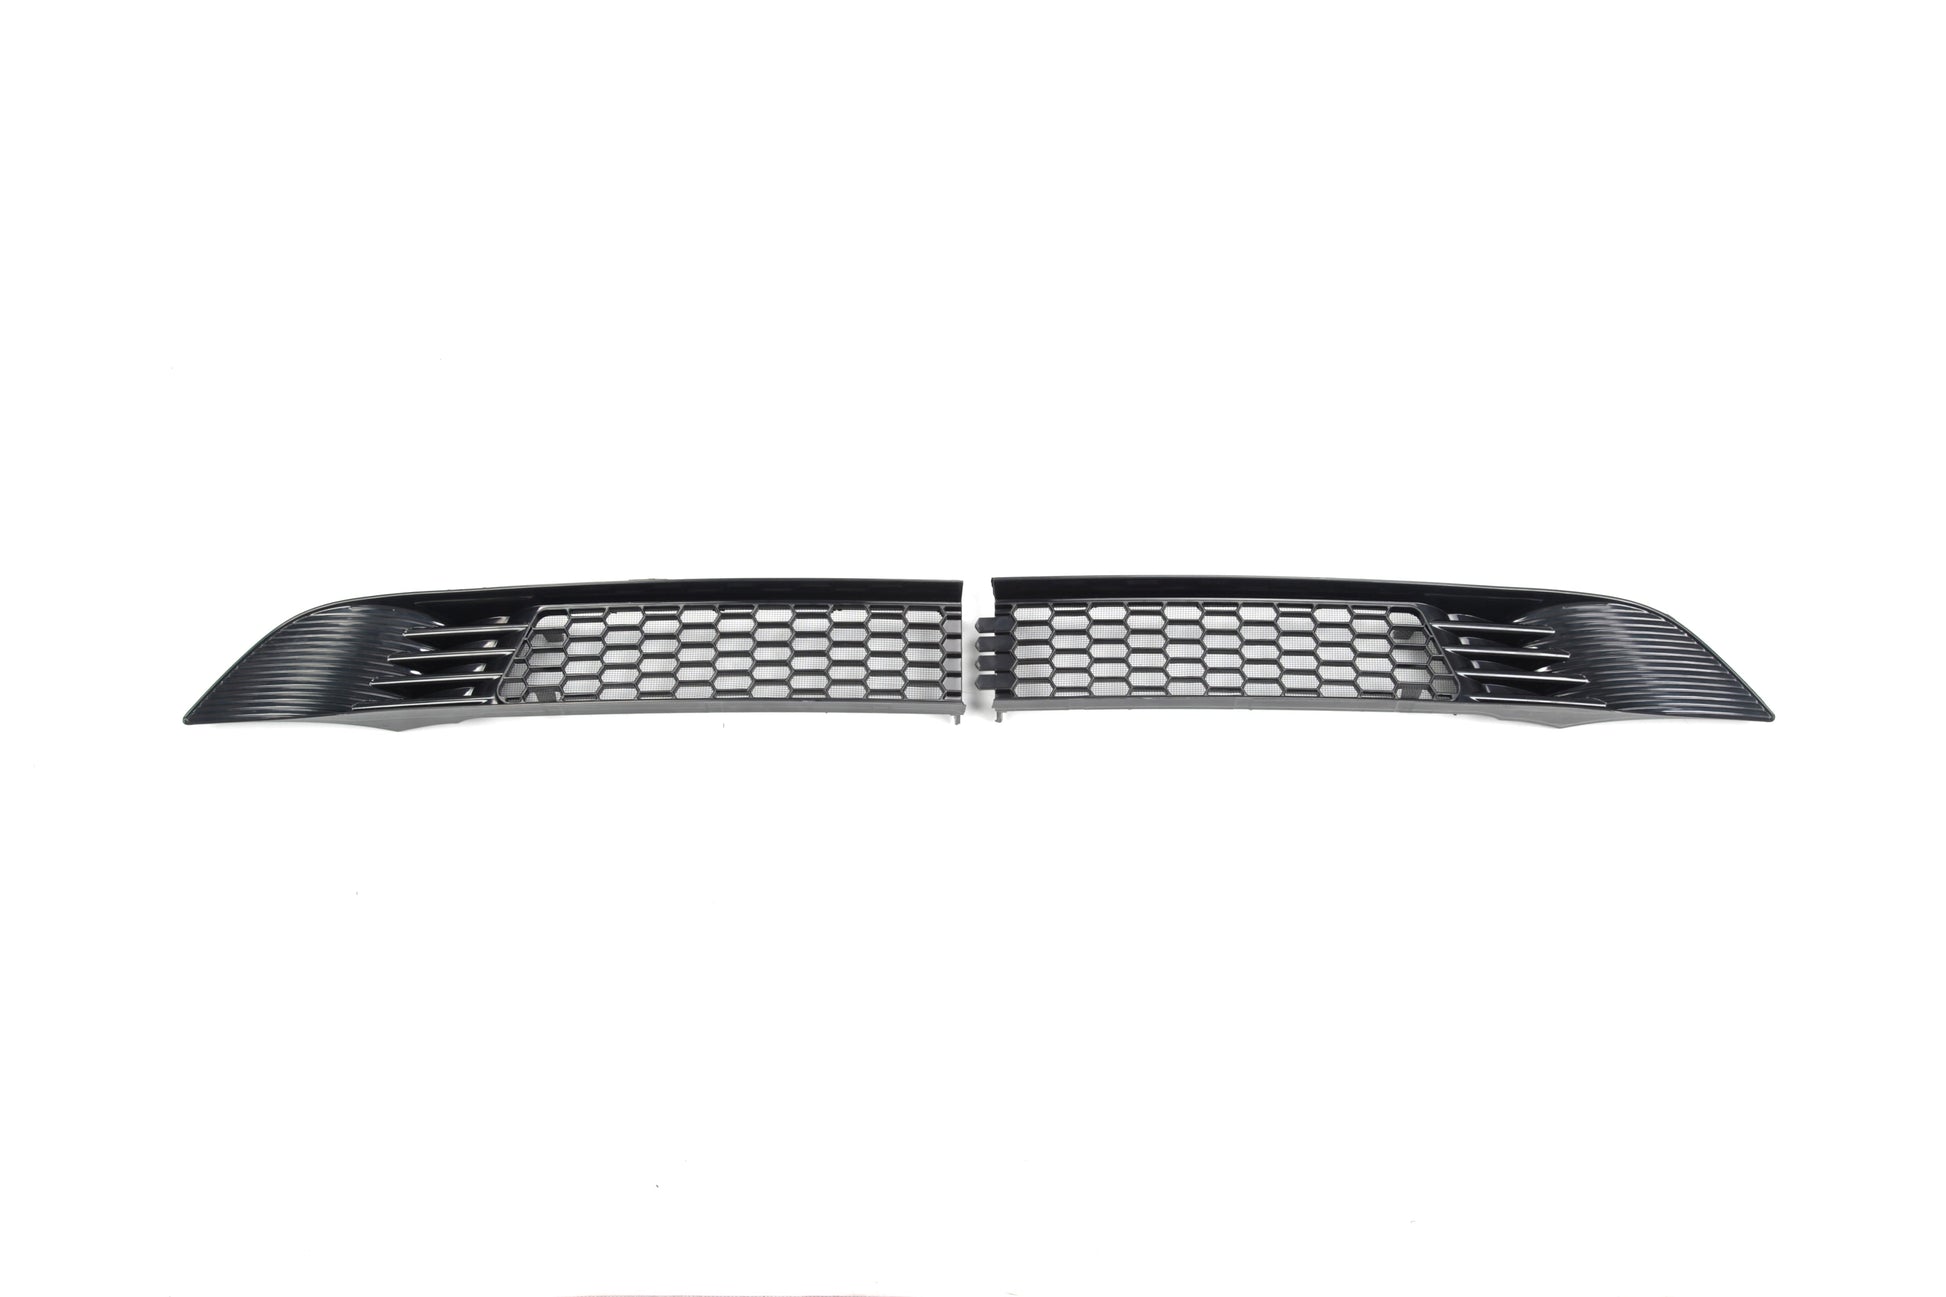 Insect screens suitable for Tesla Model 3 2017-2023 - Tesery Official Store